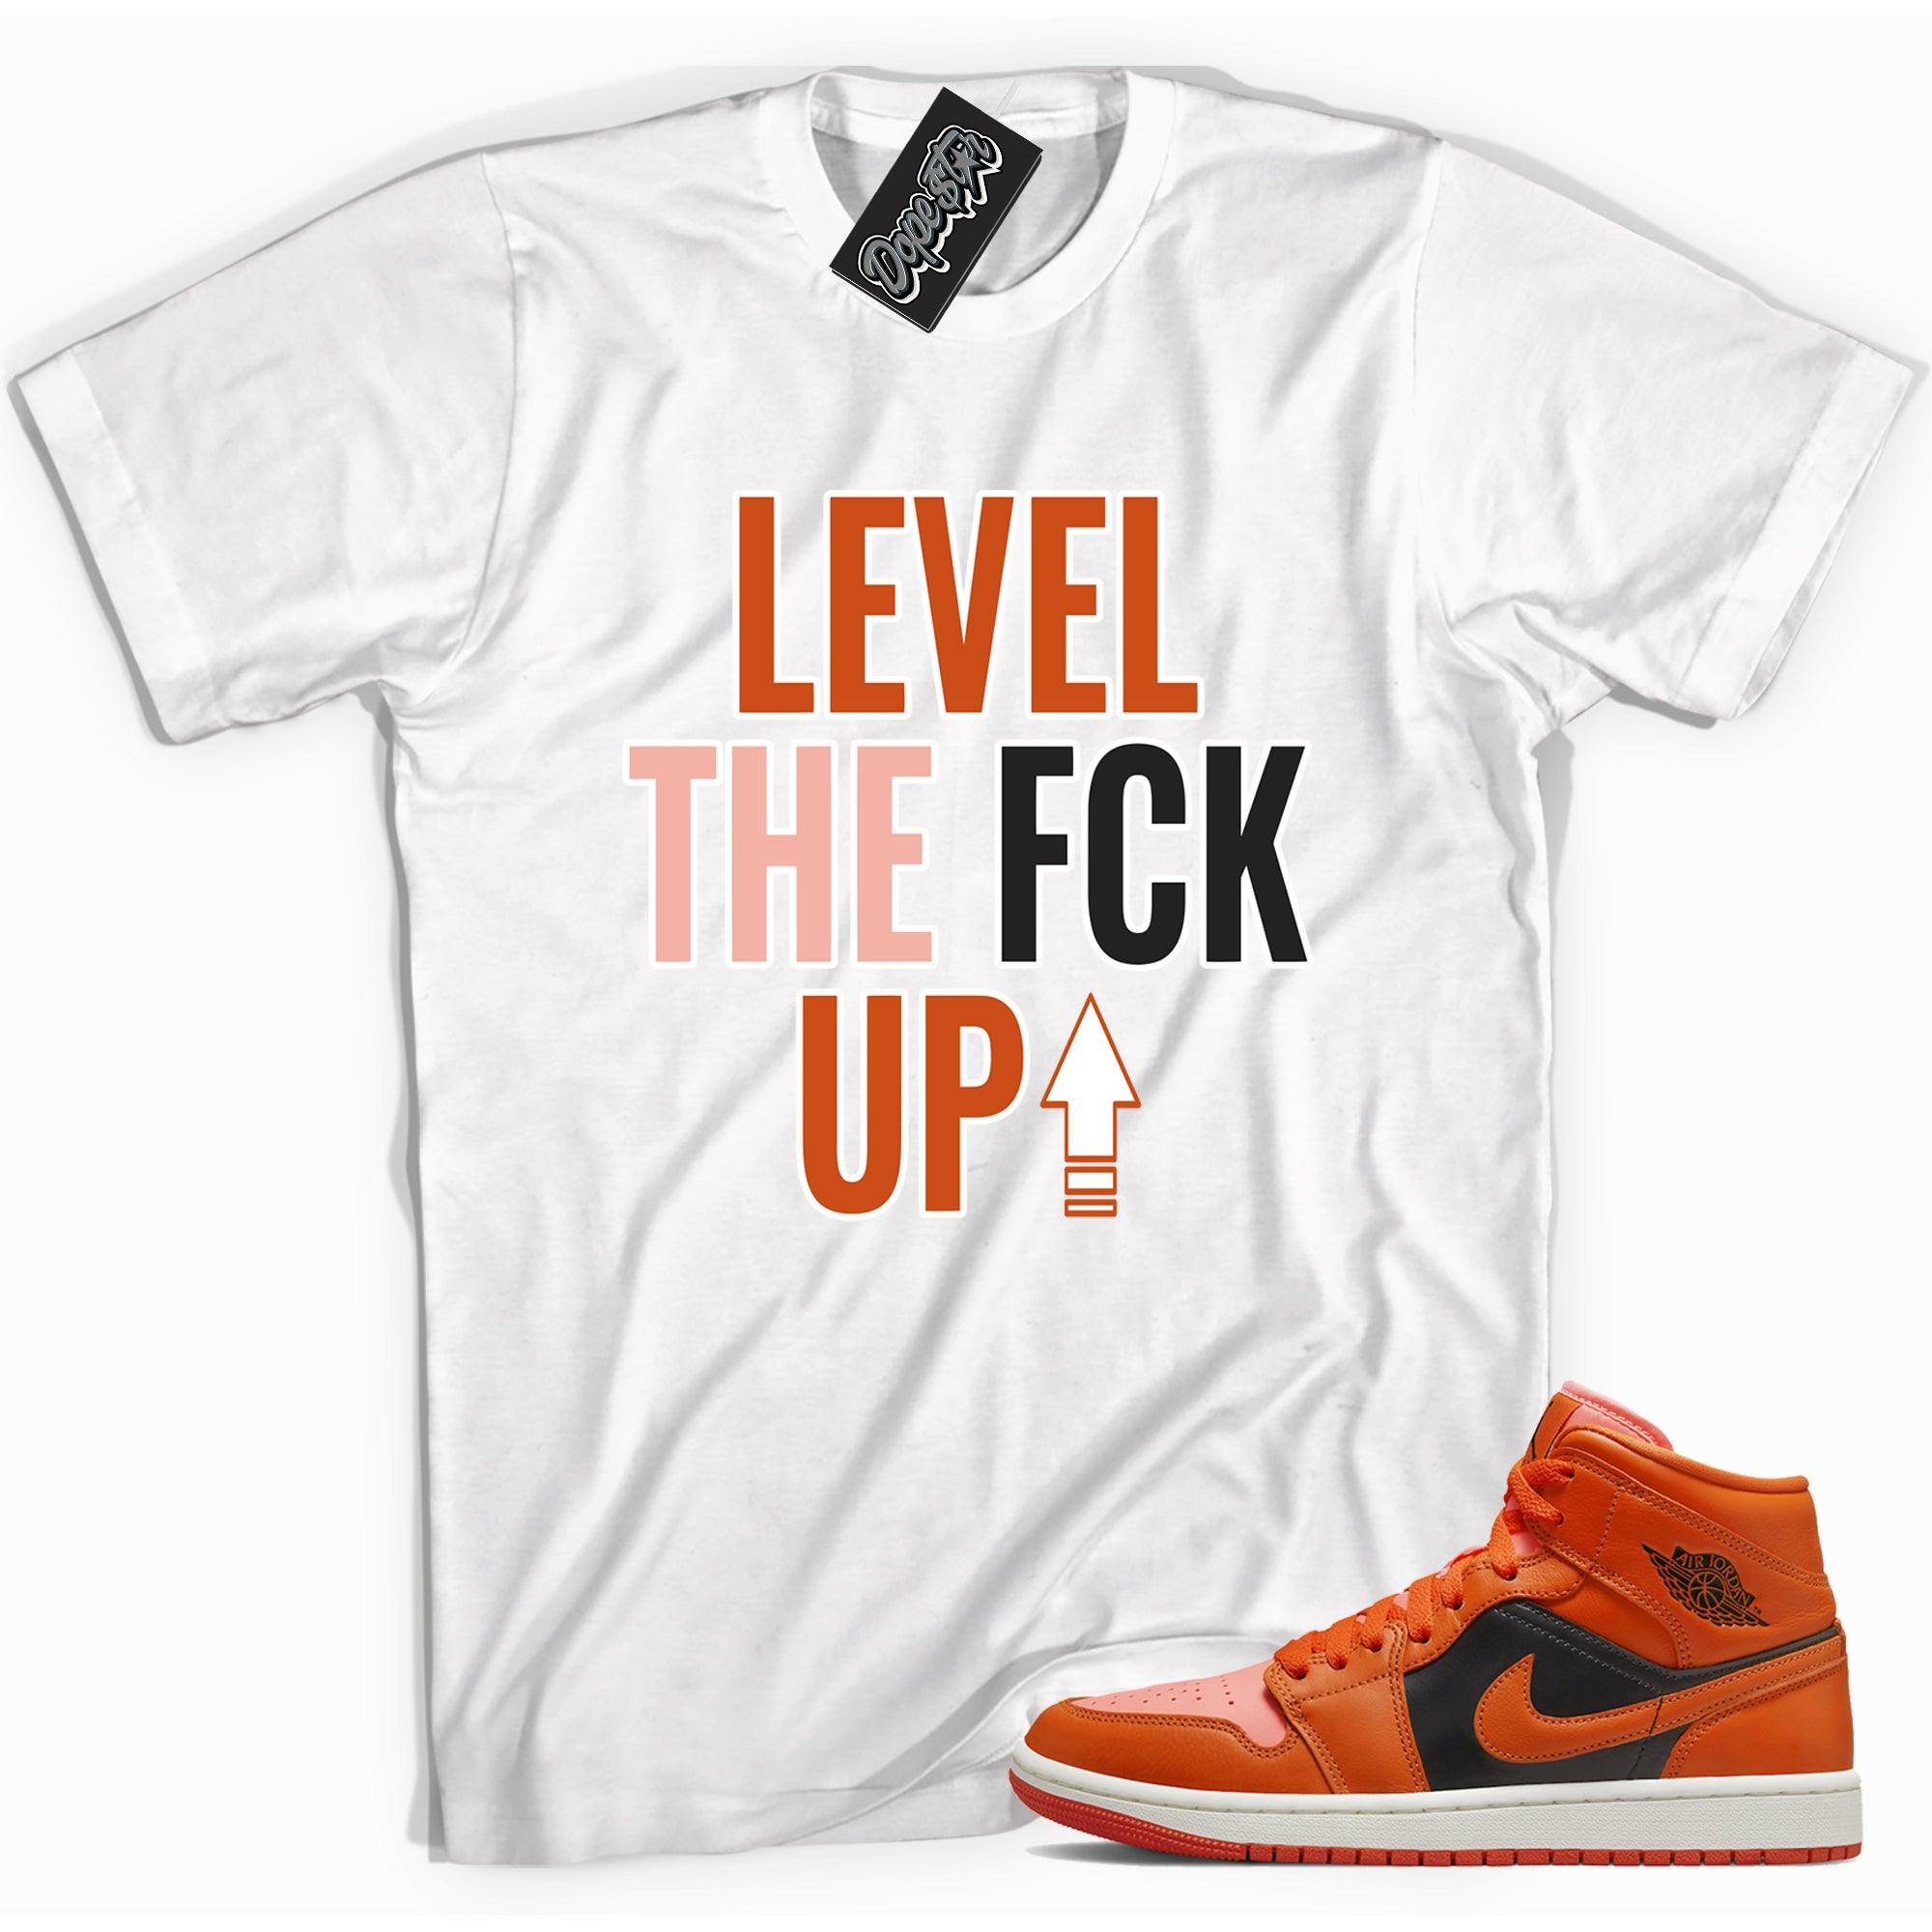 Cool white graphic tee with 'Level Up' print, that perfectly matches Air Jordan 1 Mid Orange Black sneakers.